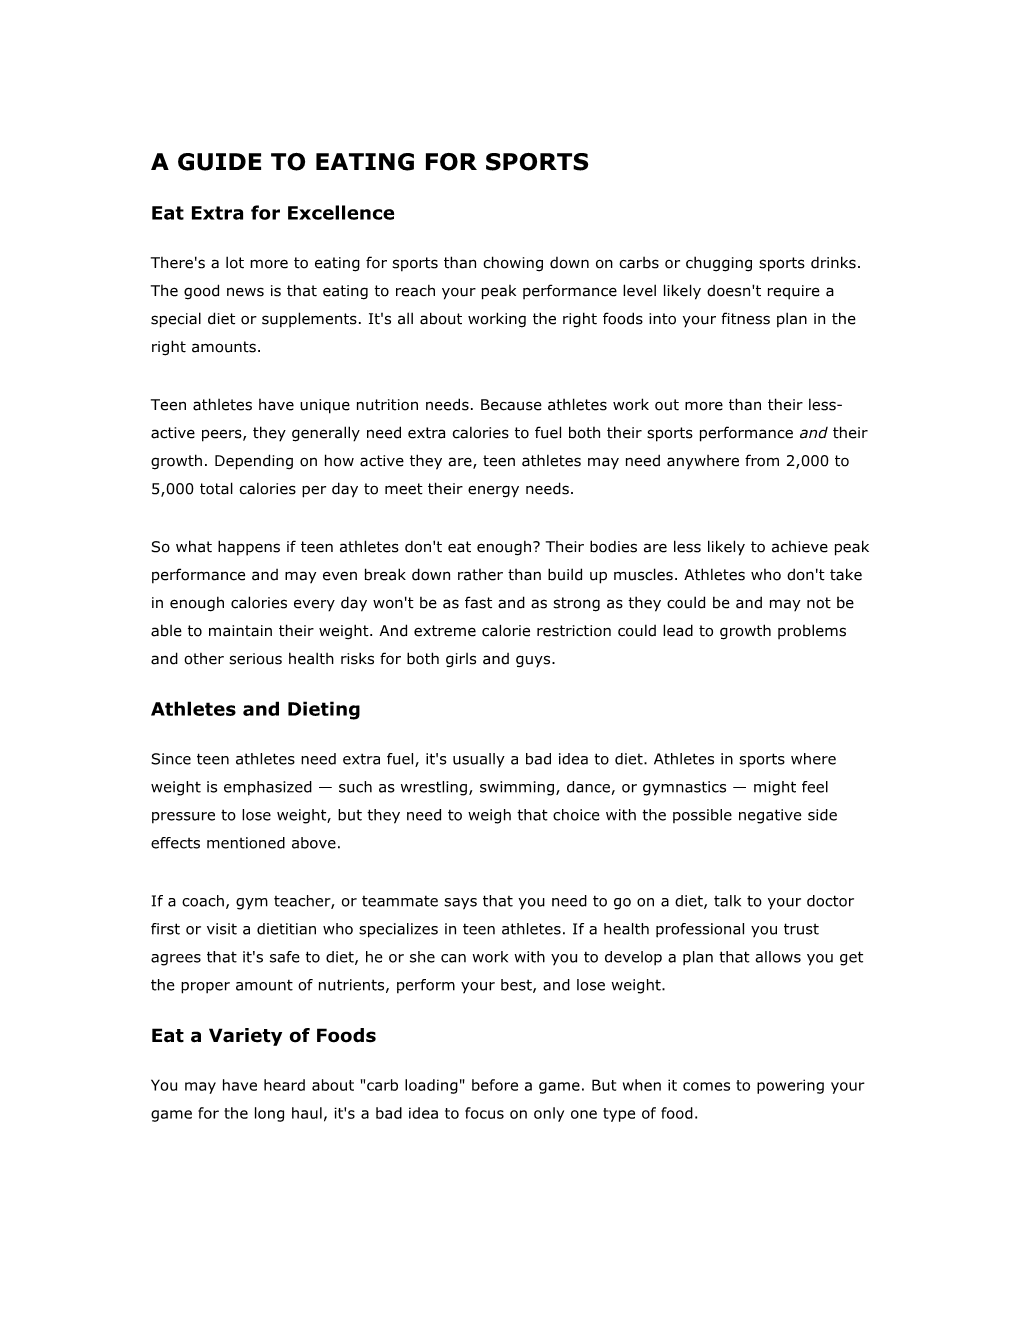 A Guide to Eating for Sports